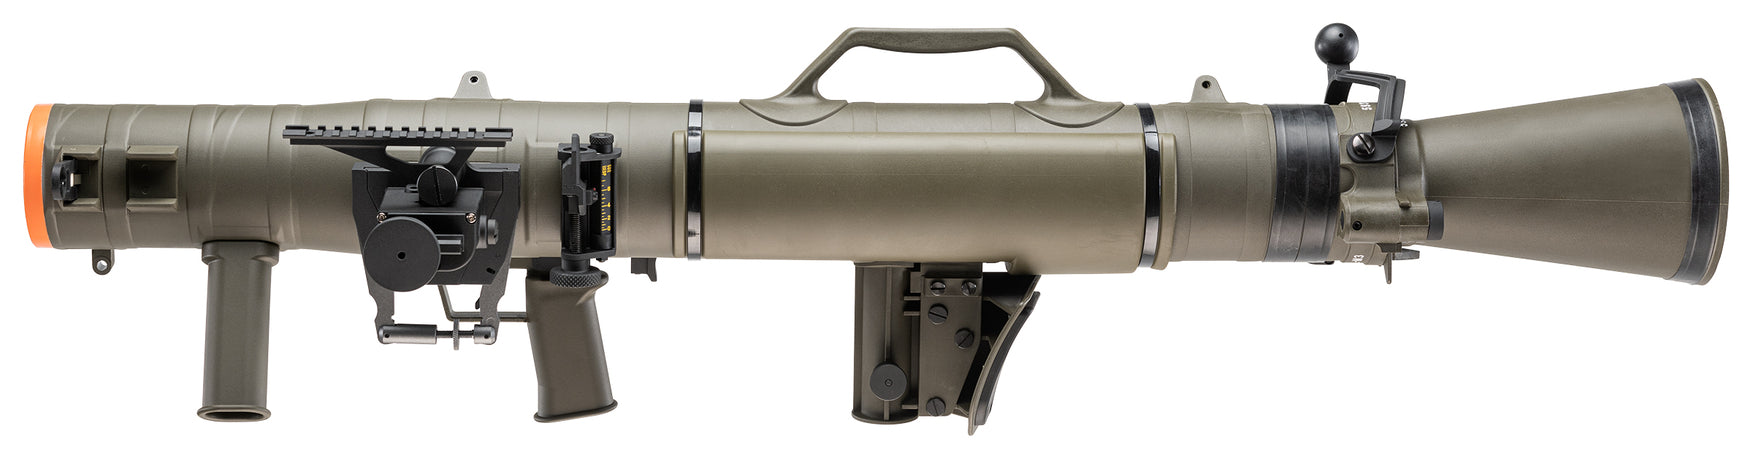 EF M3 MAAWS LAUNCHER GBB -65MM